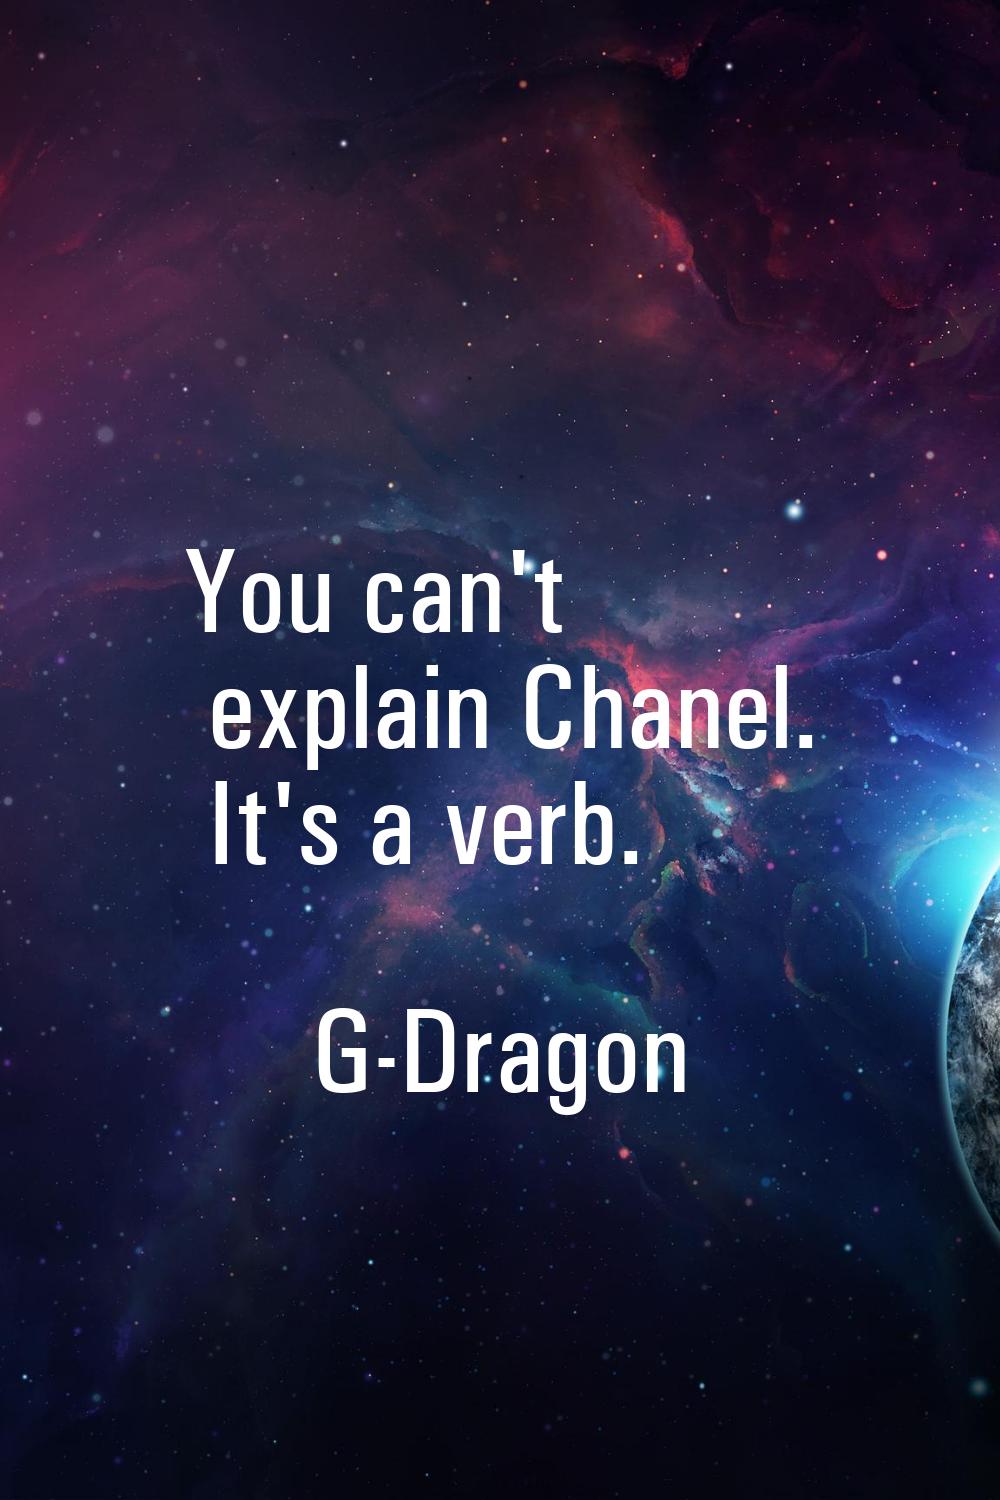 You can't explain Chanel. It's a verb.